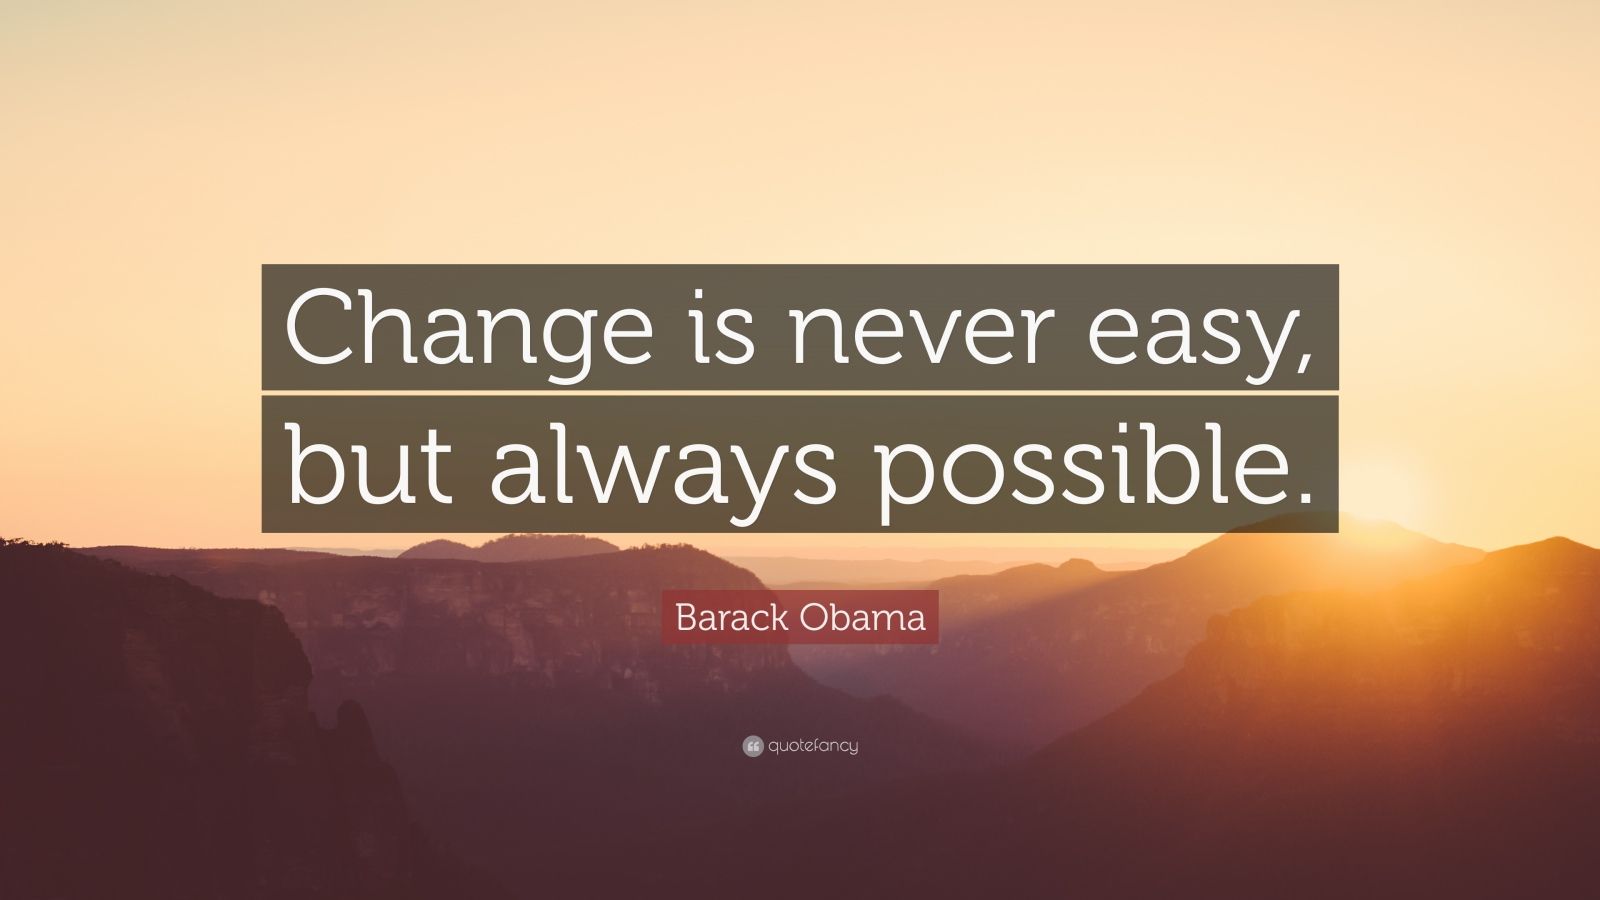 Barack Obama Quote: “Change is never easy, but always possible.” (12 ...